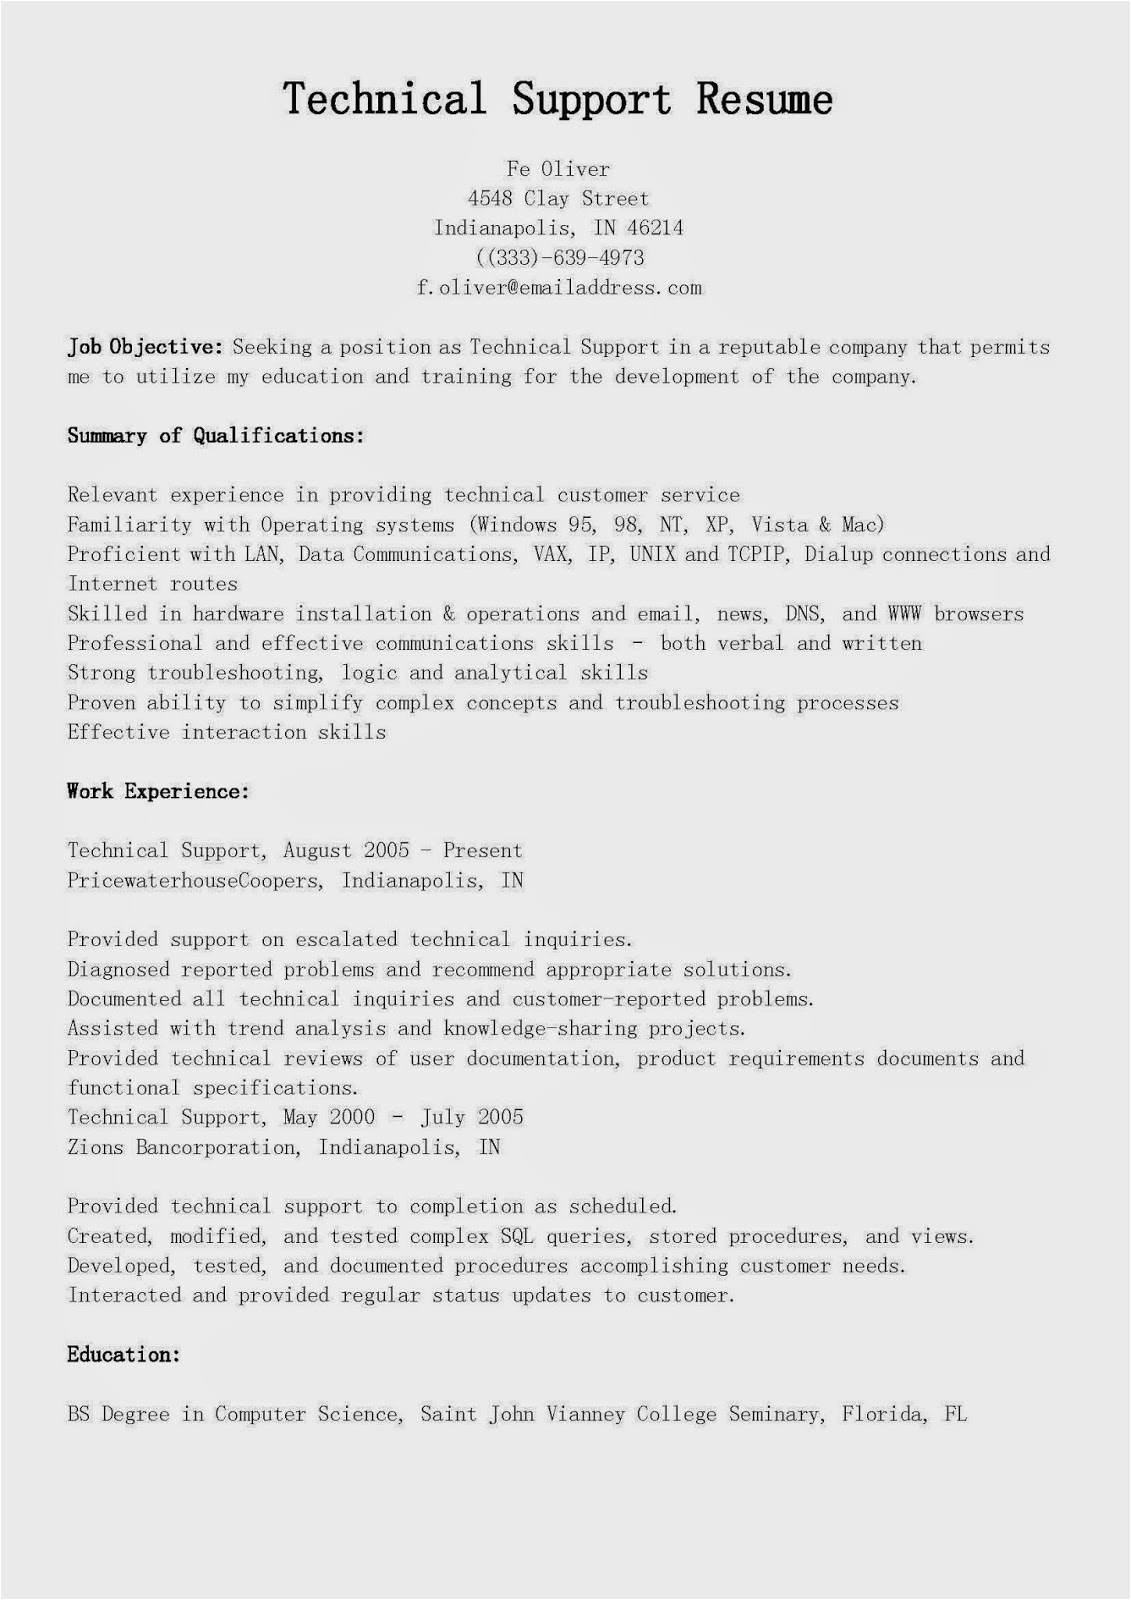 Customer Service Technical Support Sample Resume Resume Samples Technical Support Resume Sample